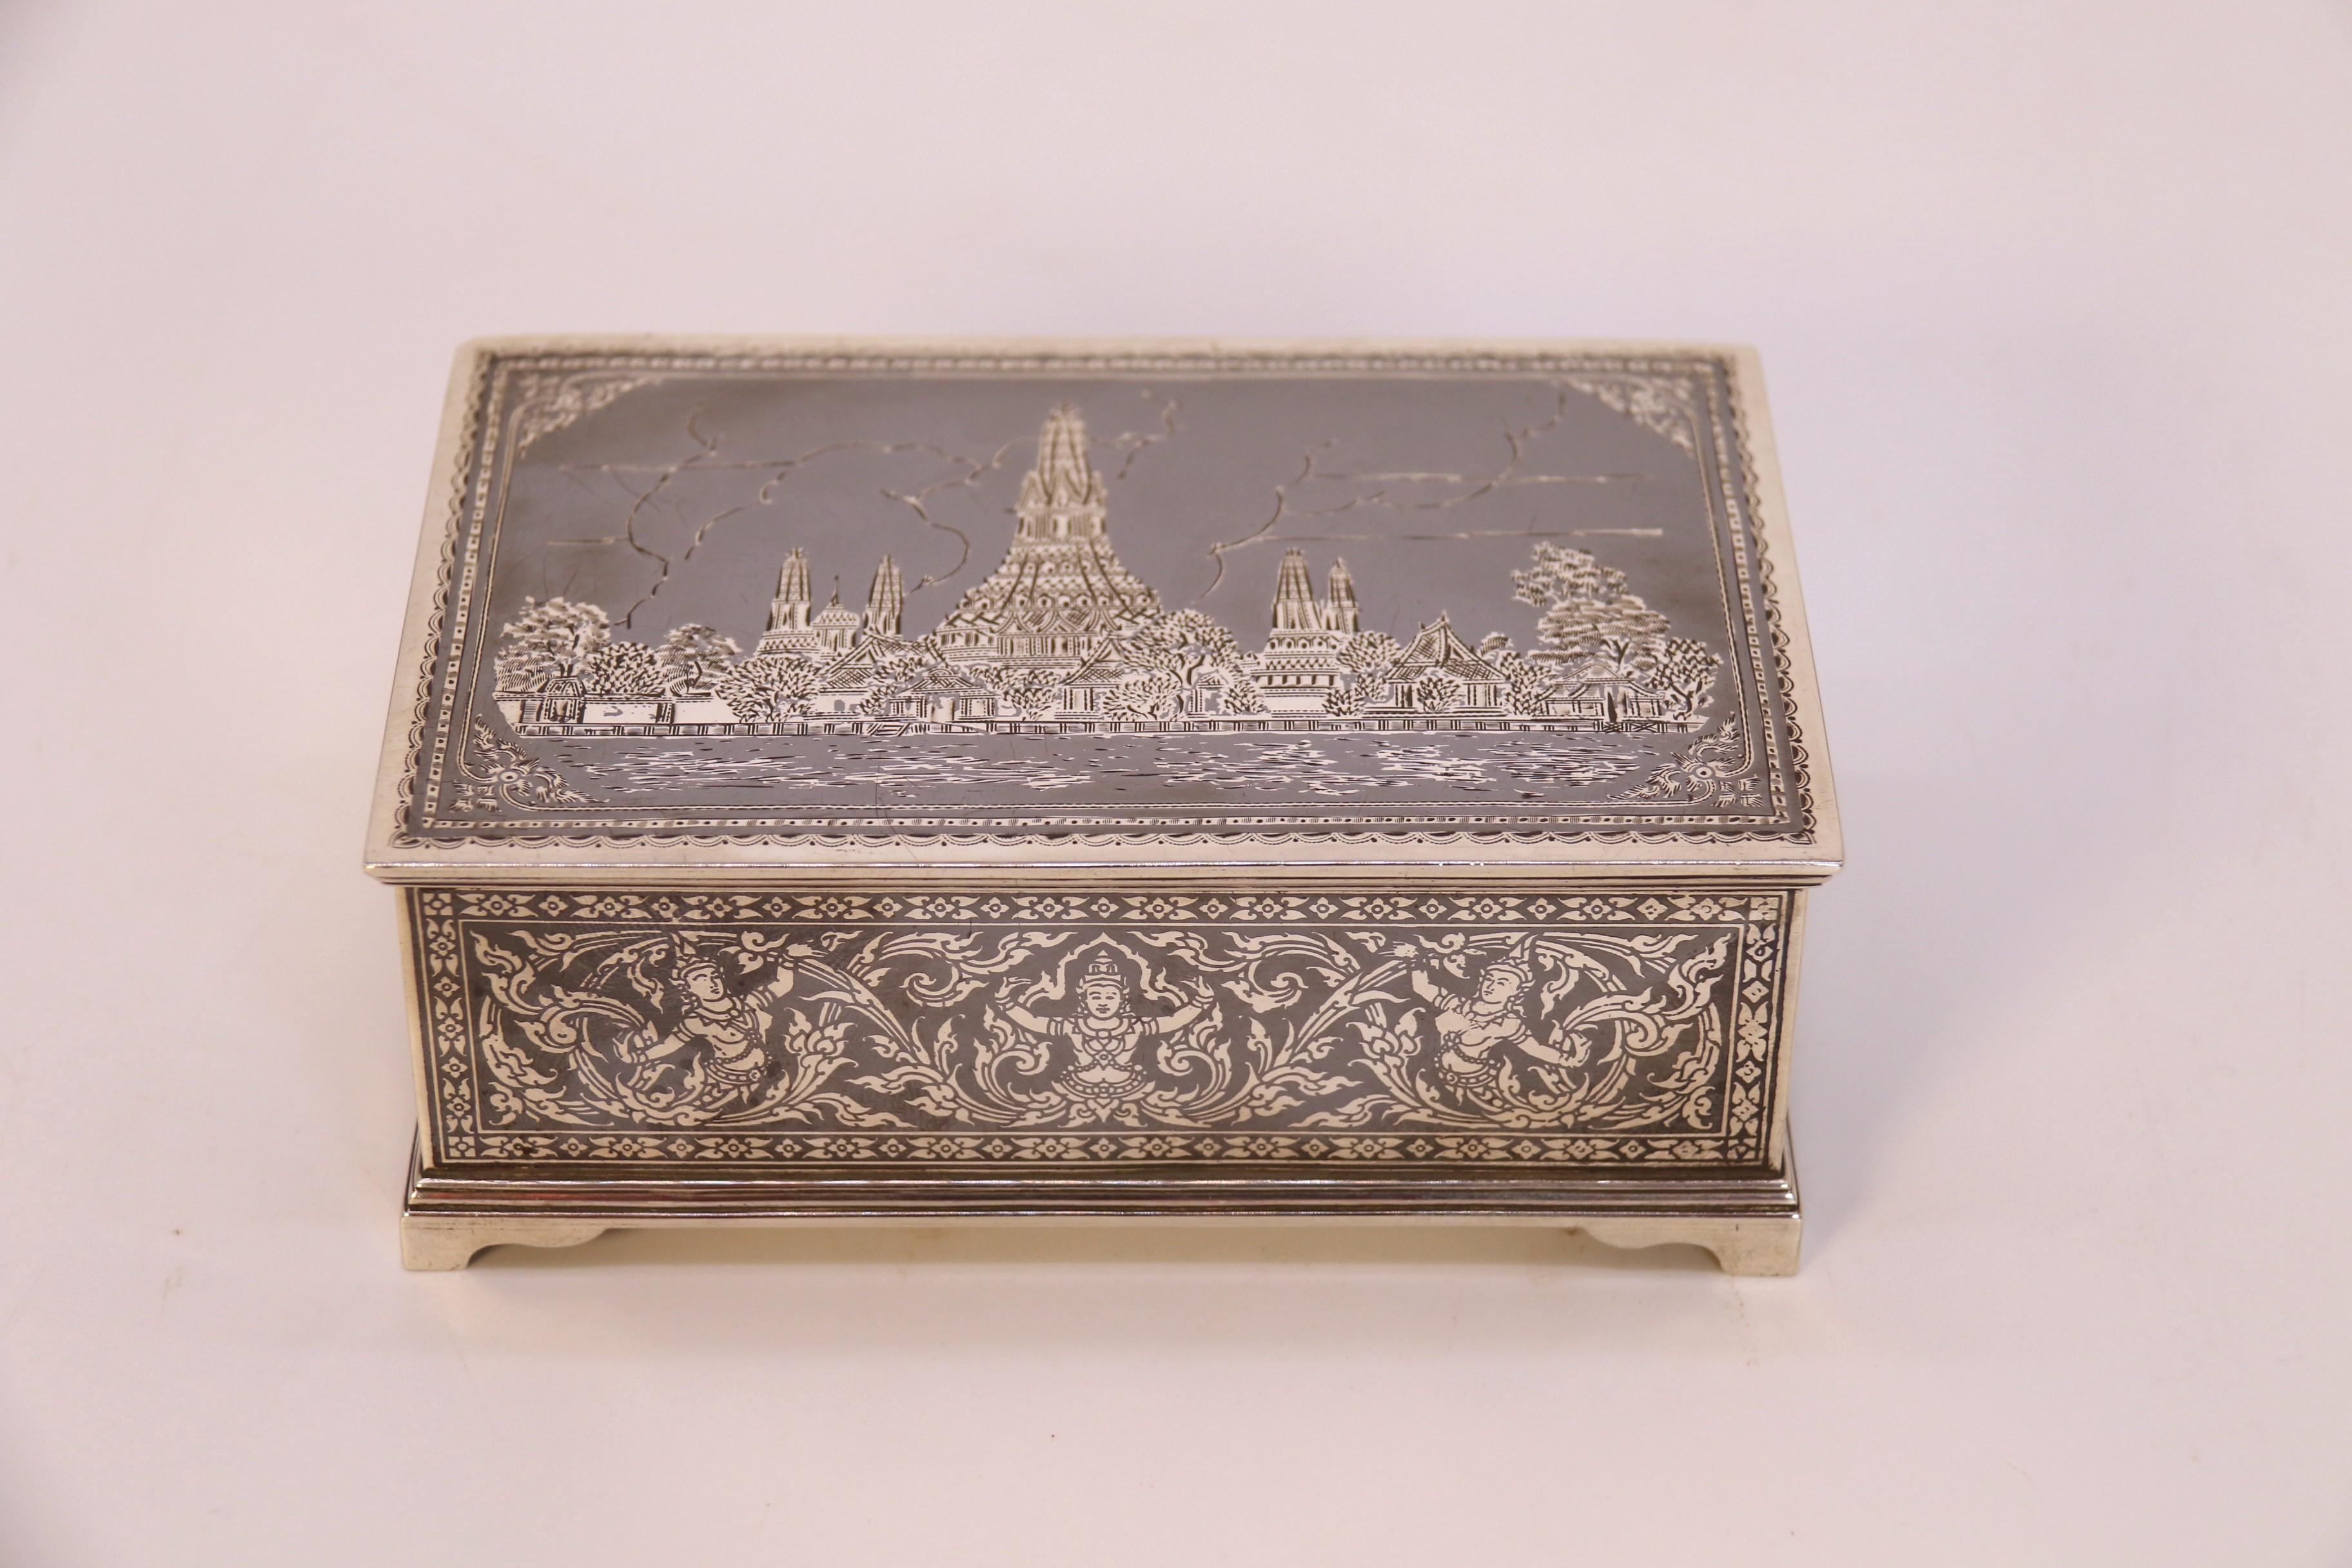 
This very interesting and decorative silver box was made in Siam now Thailand circa 1920. It is made from solid high grade silver (tested) and is beautifully decorated with niello work which is a combination of hand engraved decoration filled with